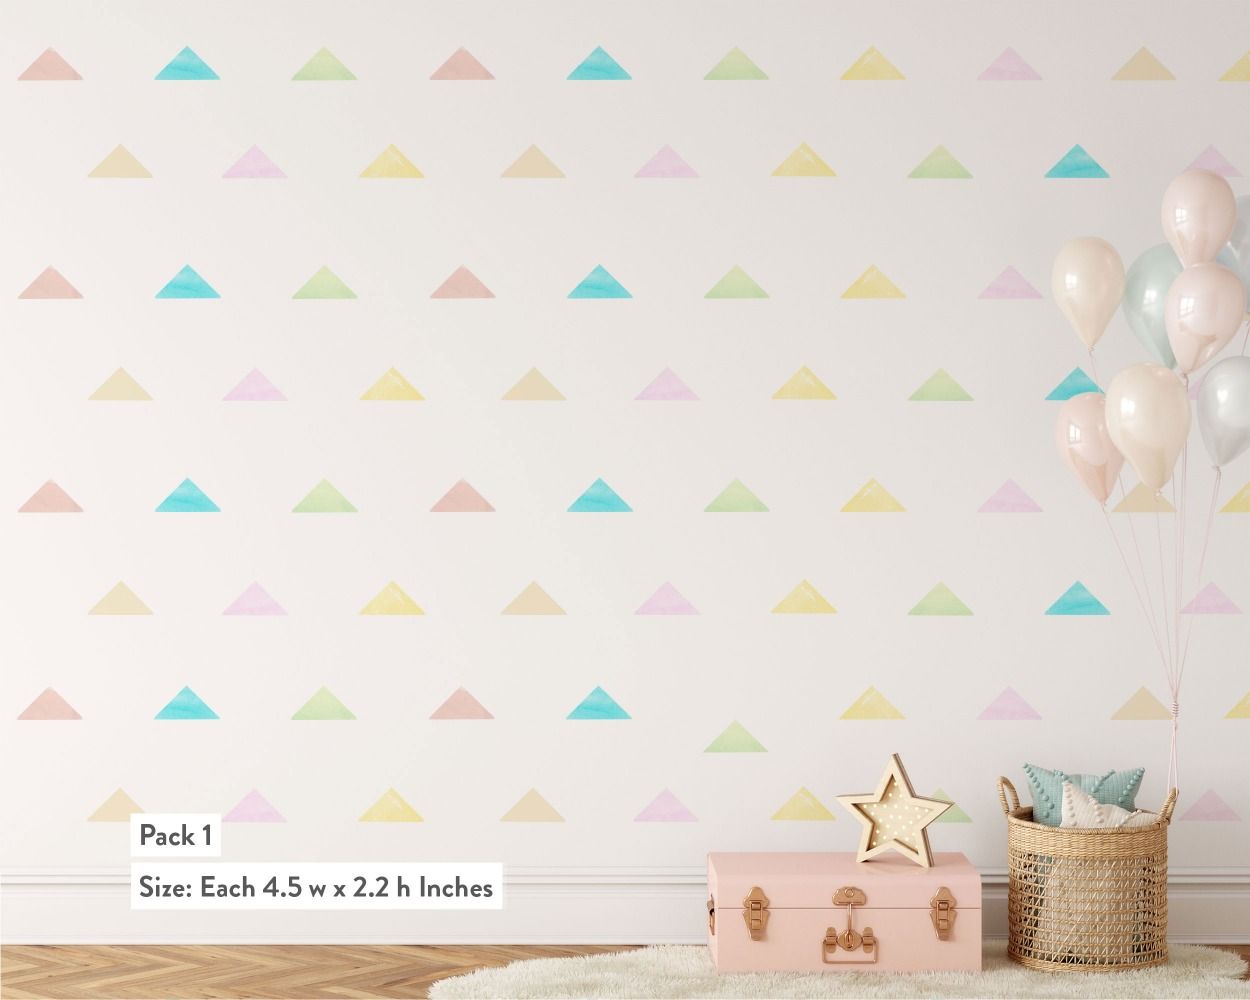 Cute And Best Style Abstract Triangles Pattern Vinyl Wall Decals For Bedroom Wall Decor